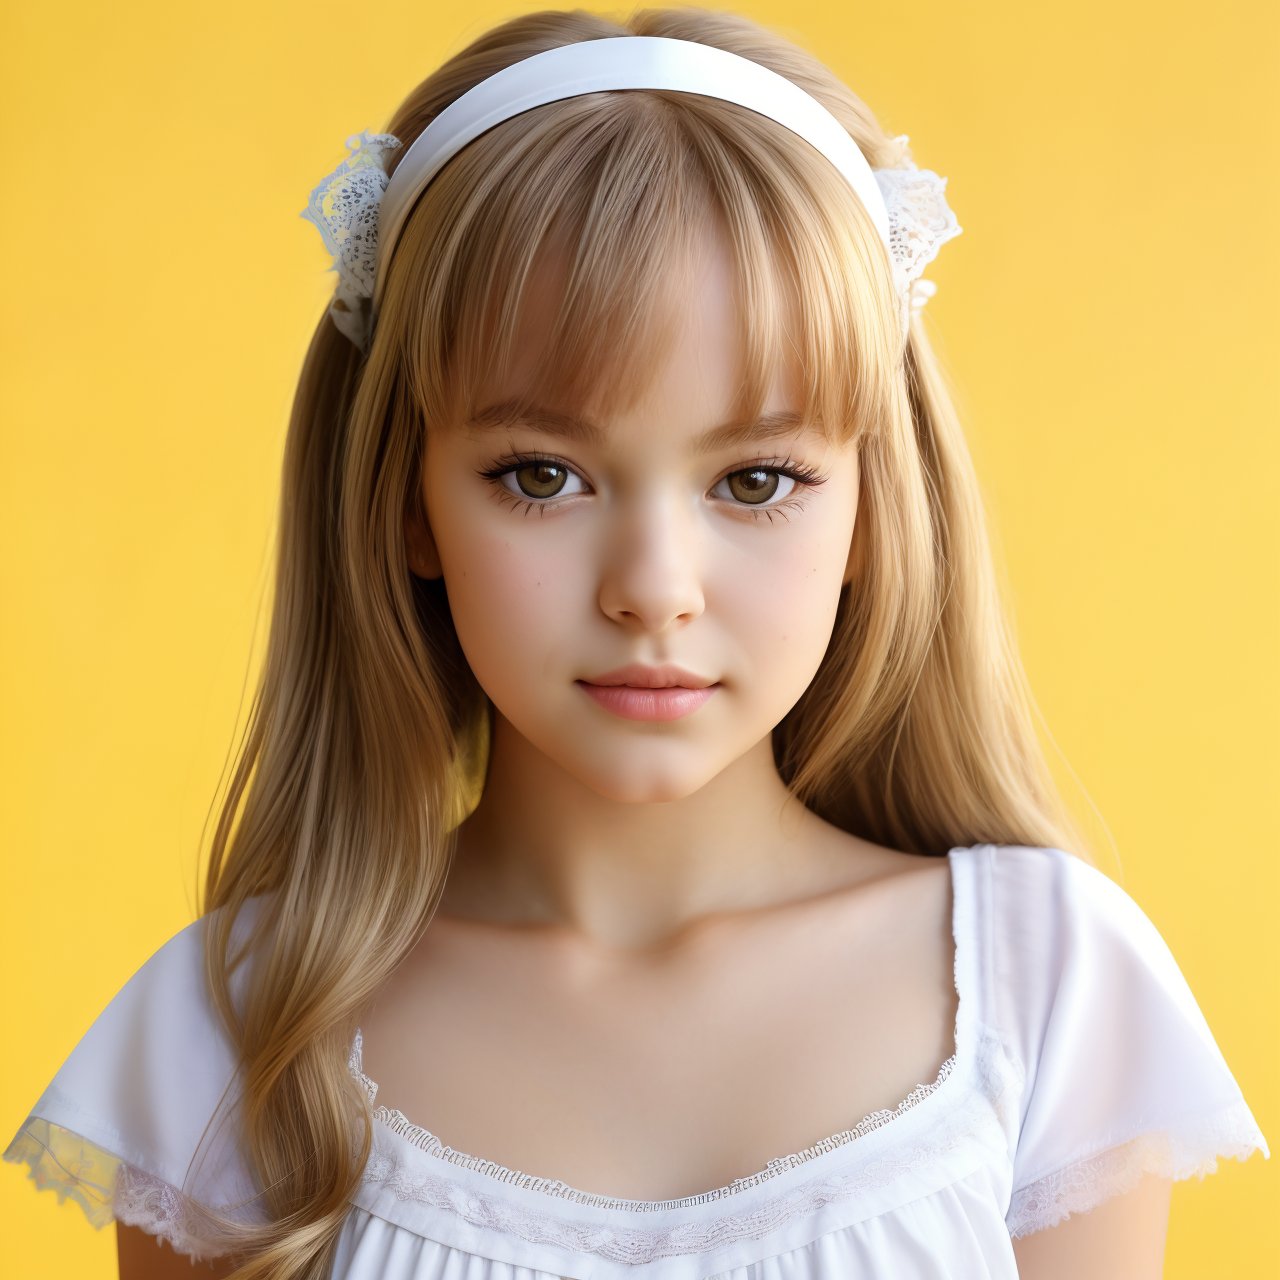 SFW, (masterpiece:1.3), best quality, extra resolution, wallpaper, looking back, close up portrait of seductive (AIDA_LoRA_AnC:1.25) <lora:AIDA_LoRA_AnC:0.70> in a white t-shirt and with a white lace headband posing for a picture on yellow background, blurry yellow background, young teen girl, pretty face, open mouth, insane level of details, studio photo, kkw-ph1, hdr, f1.8 , getty images